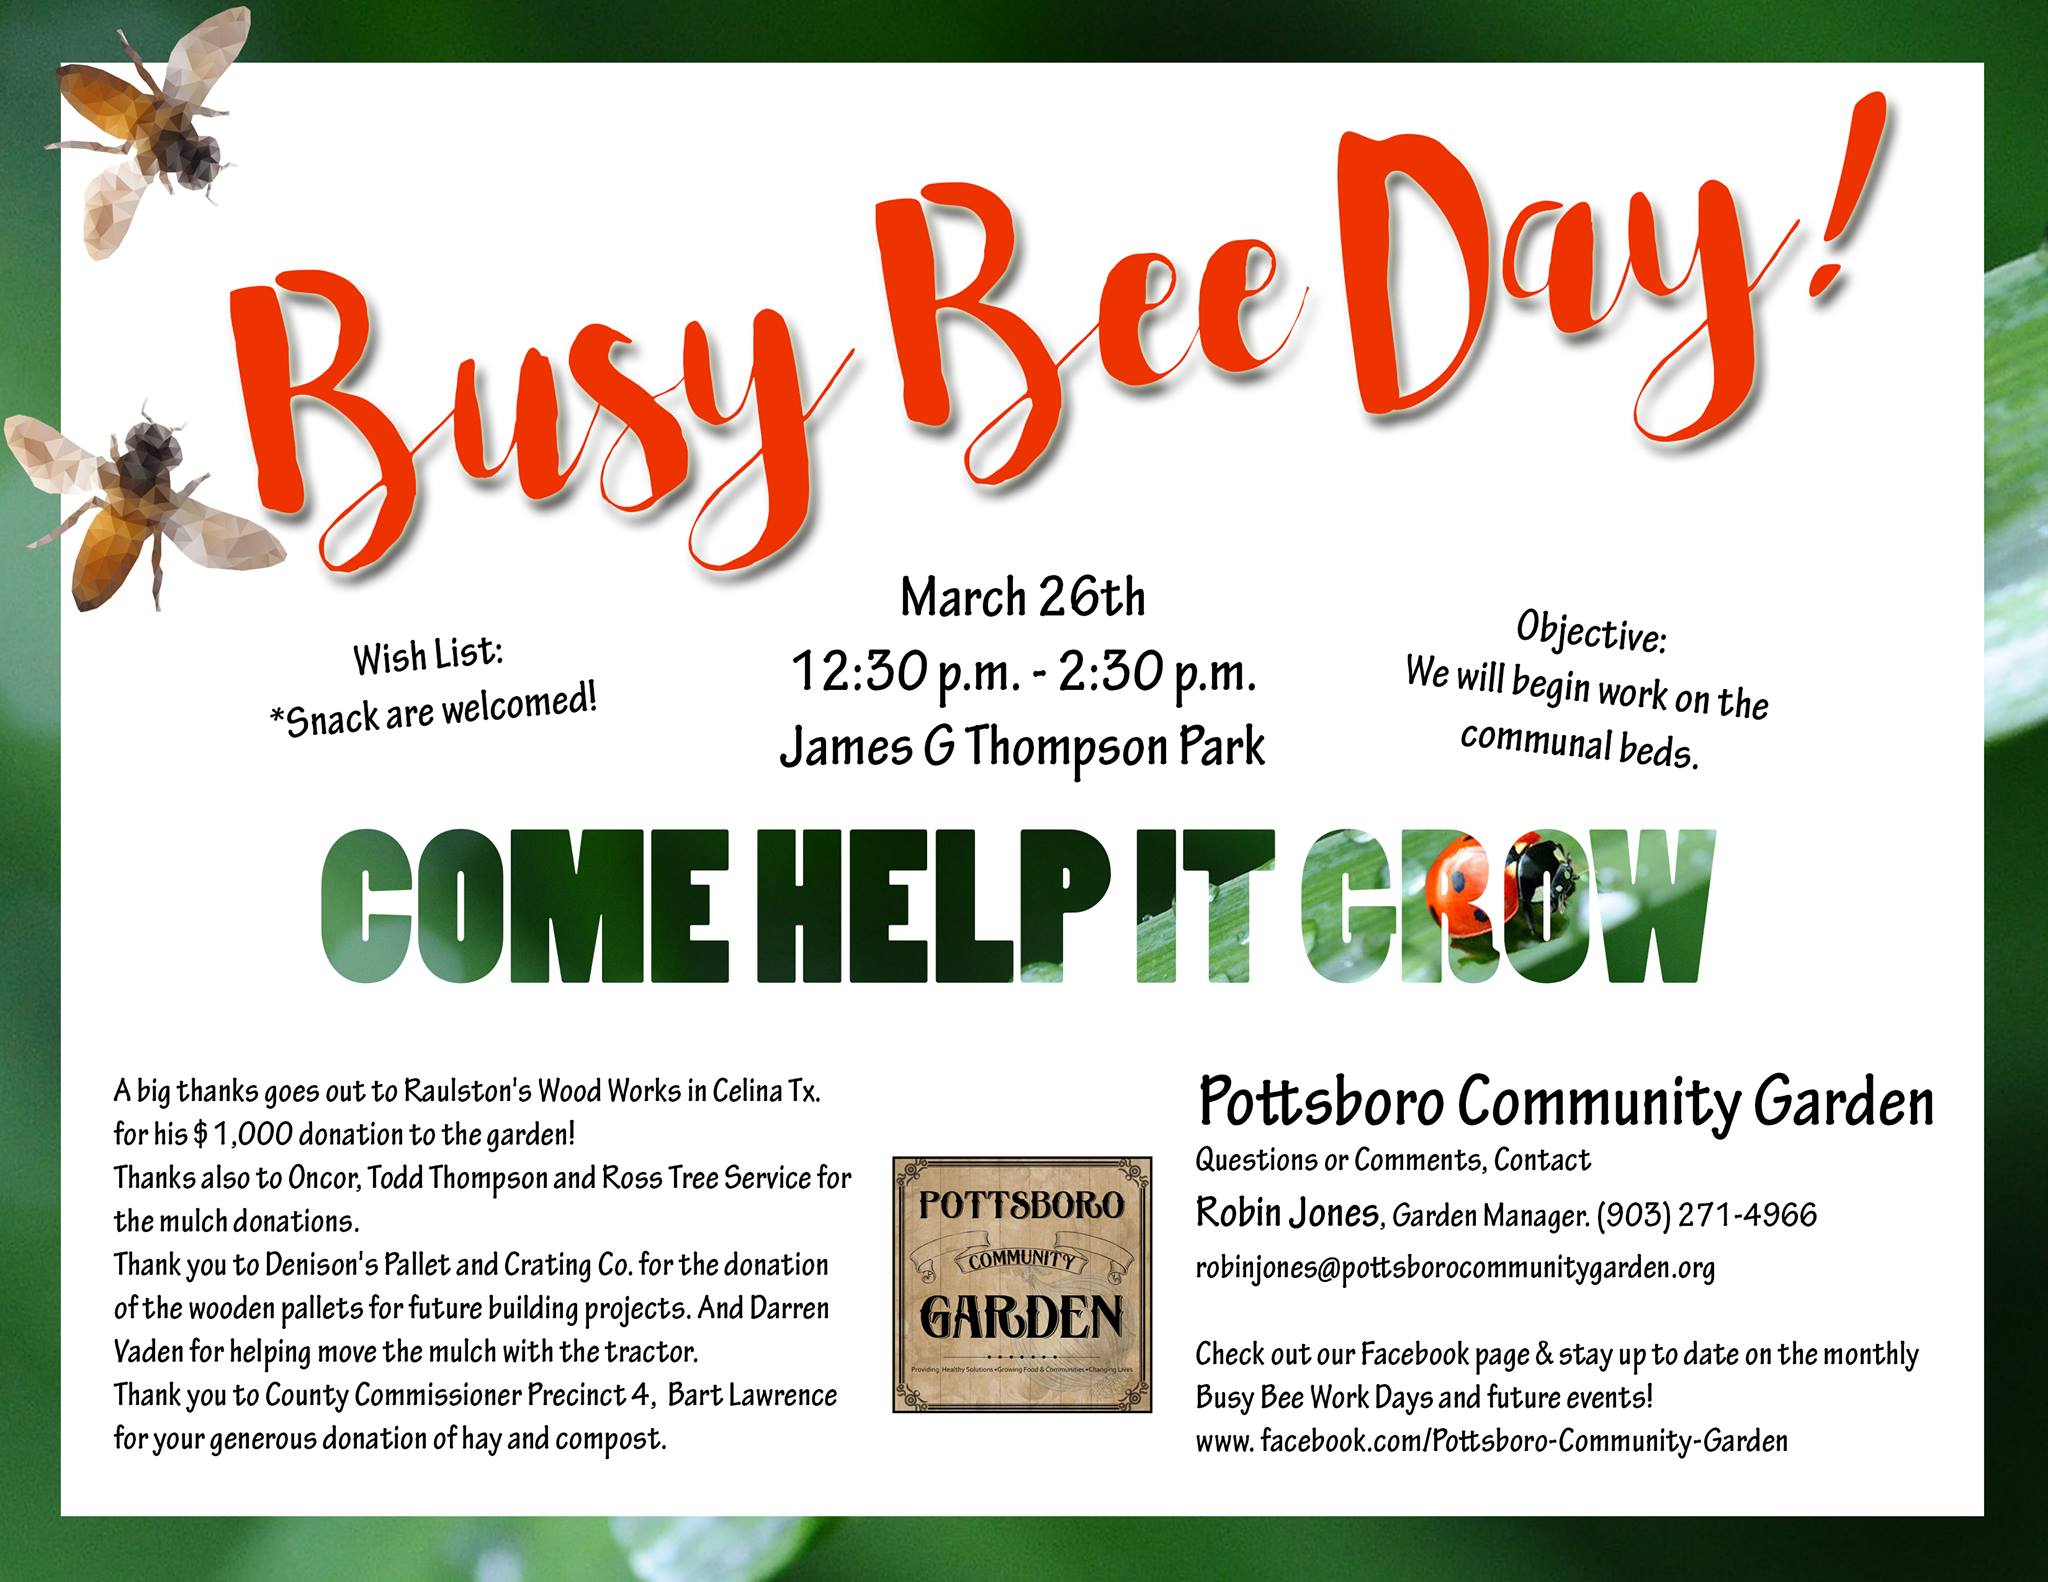 busy-bee-march-26-12-30-2-30